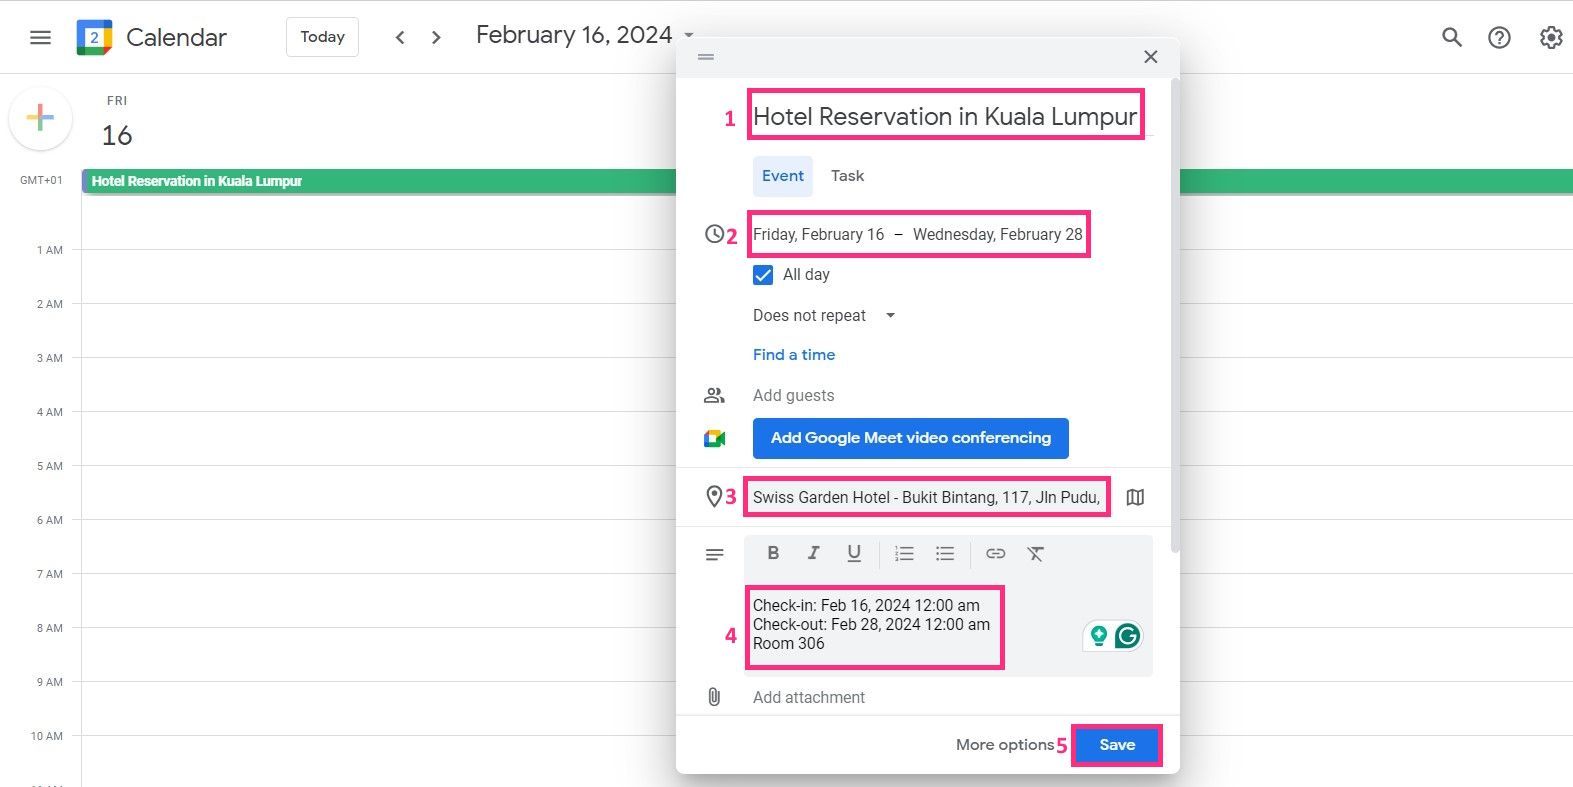 Manually creating a hotel reservation on Google Calendar